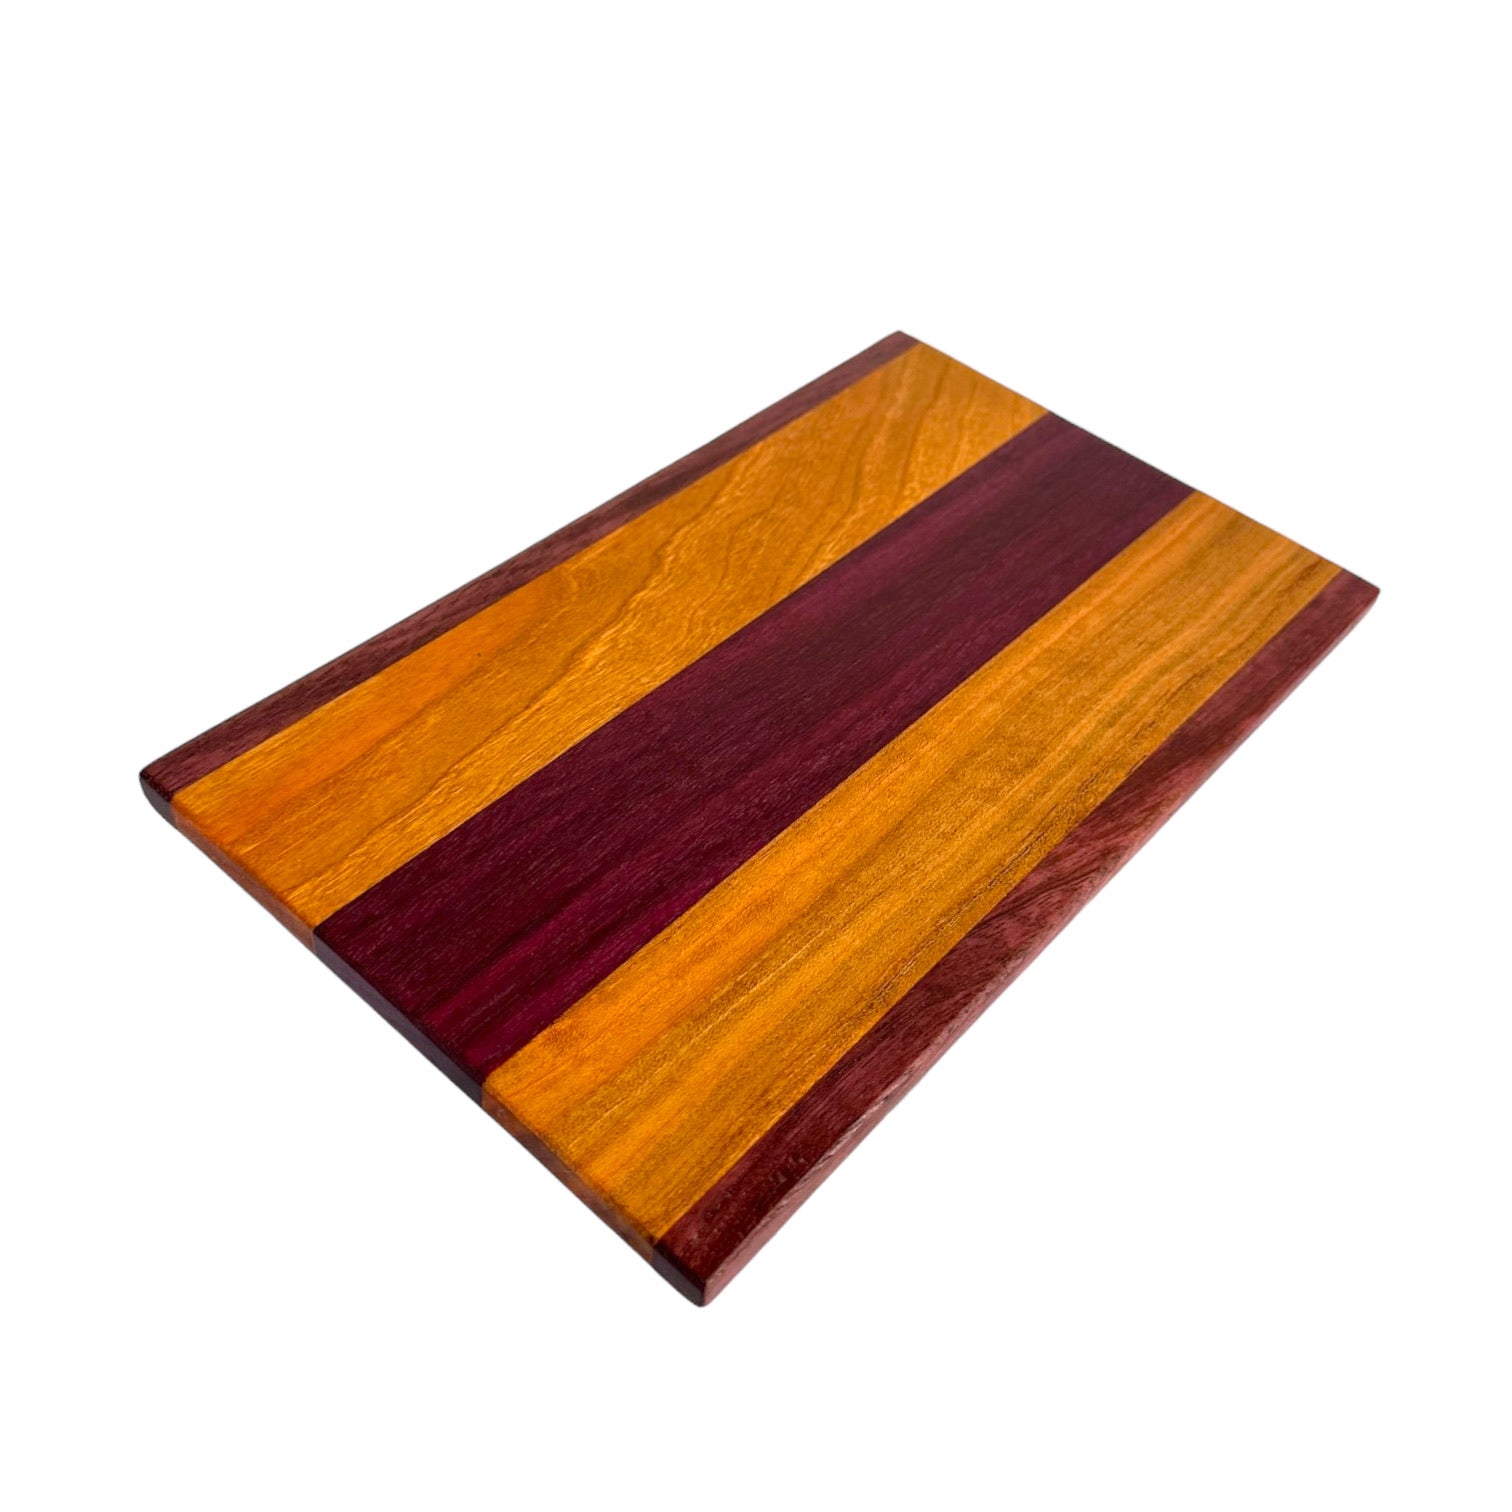 Exotic Mini Wood Cutting Boards - RTS cherry and purple heart top view